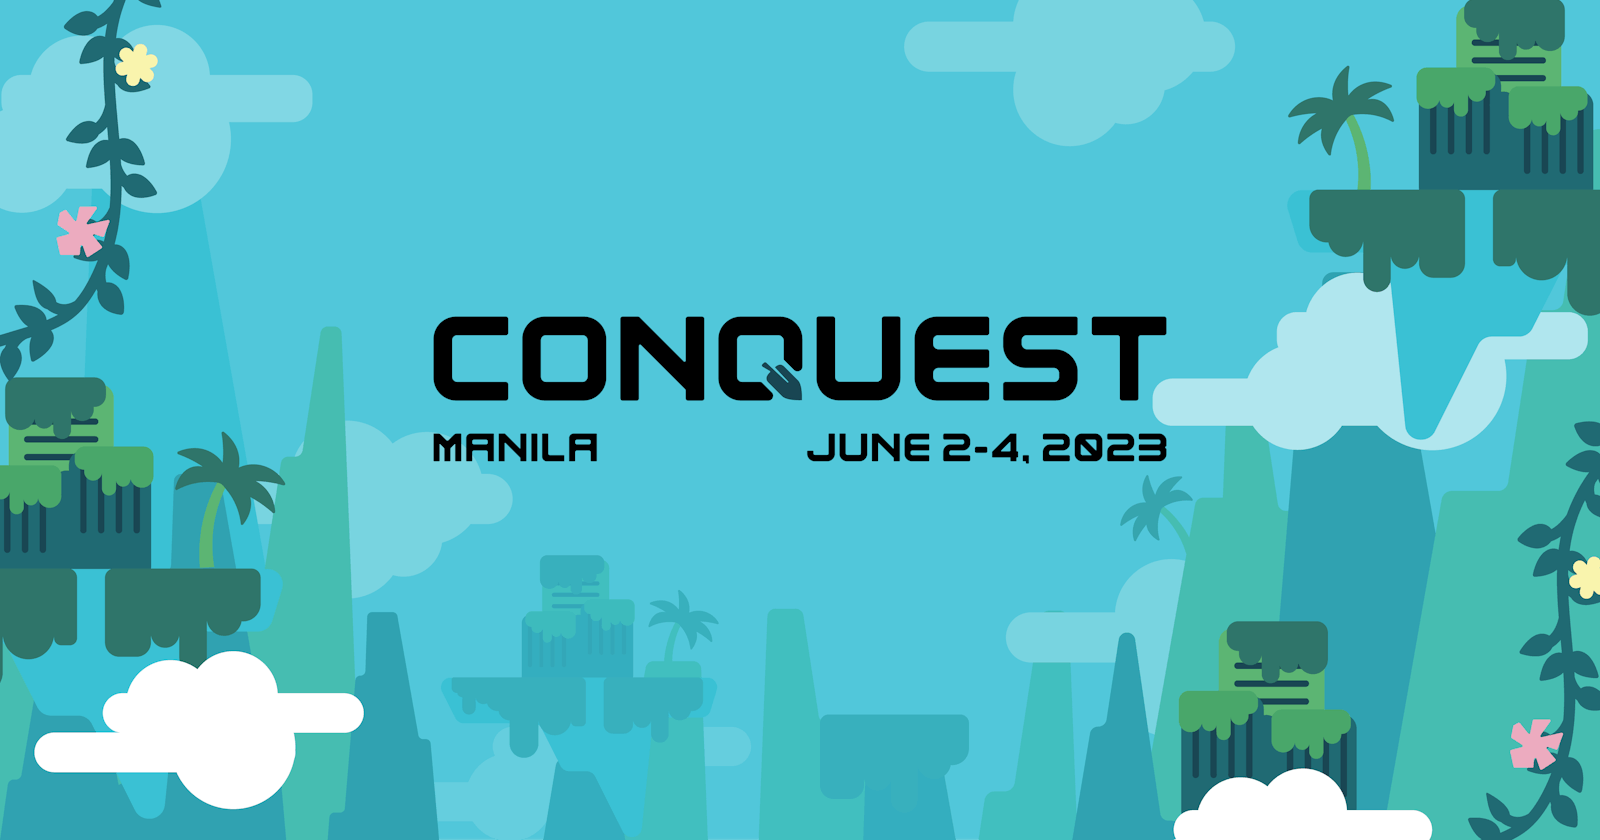 CONQuest to make waves as 'biggest PH convention' in June 2023